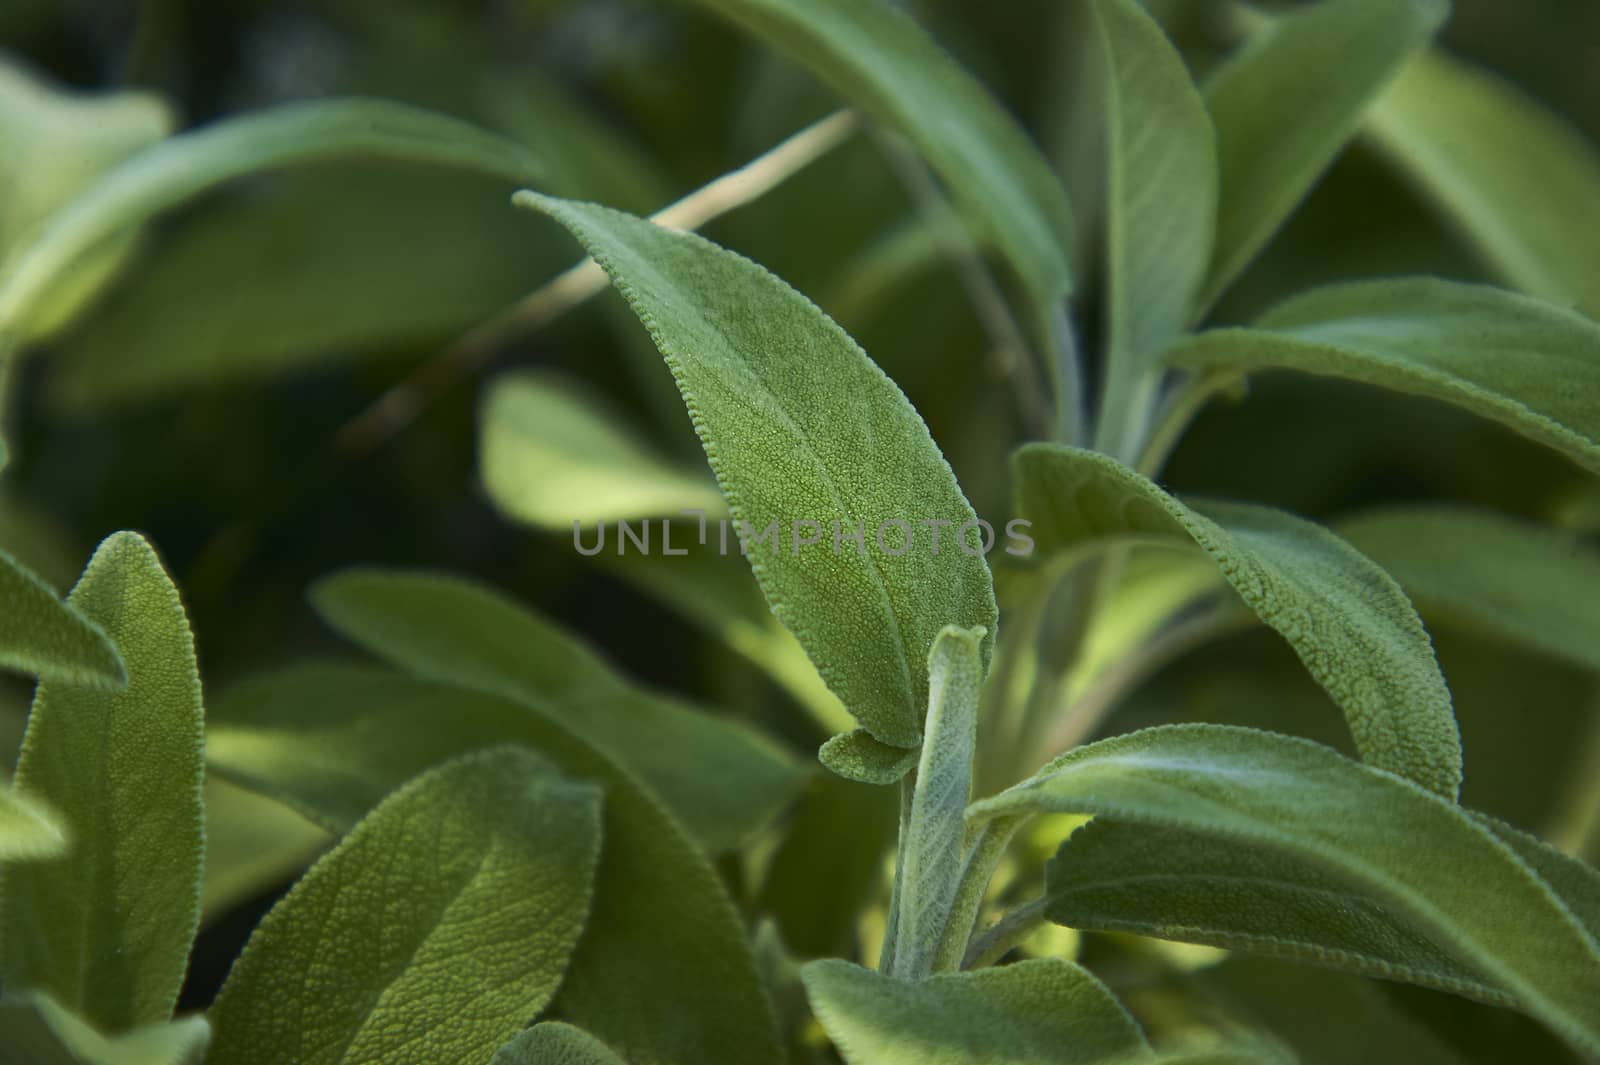 Magnifying a Salvia Sage leaf, a plant used as a spice in the kitchen.